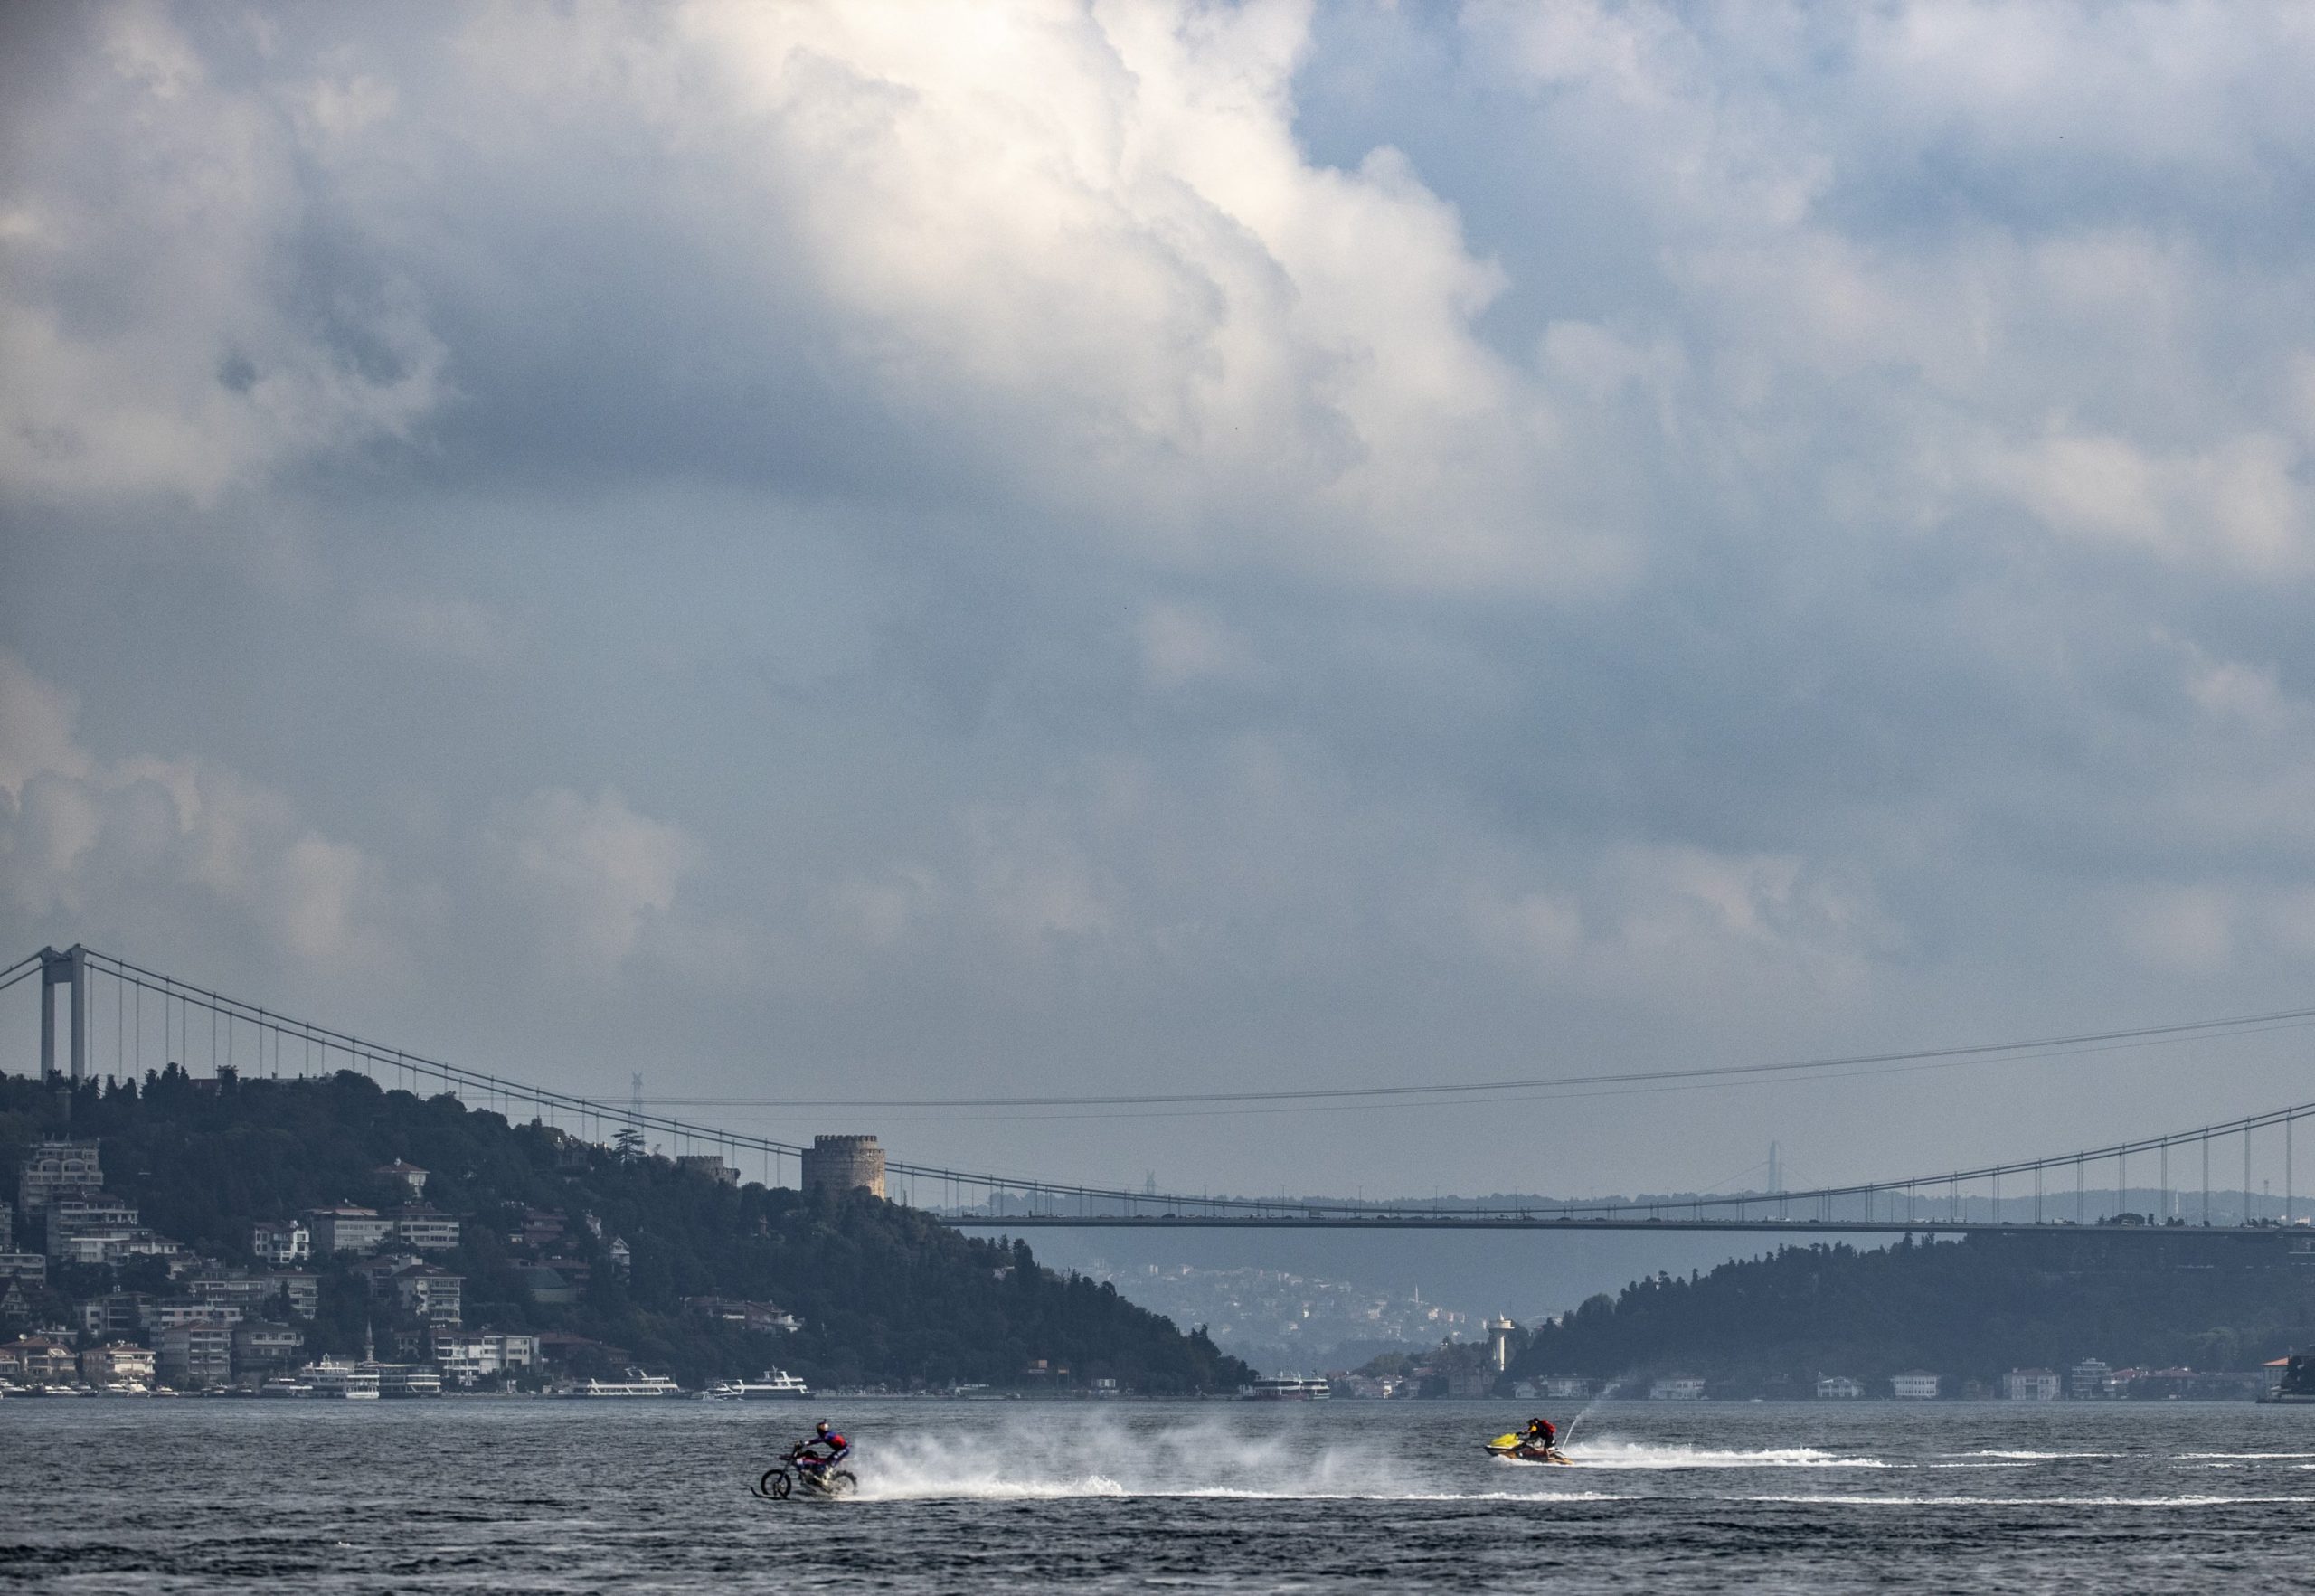 A view of Robbie Maddison riding the Strait of Istanbul with a backup ski-doo video graphing the experience